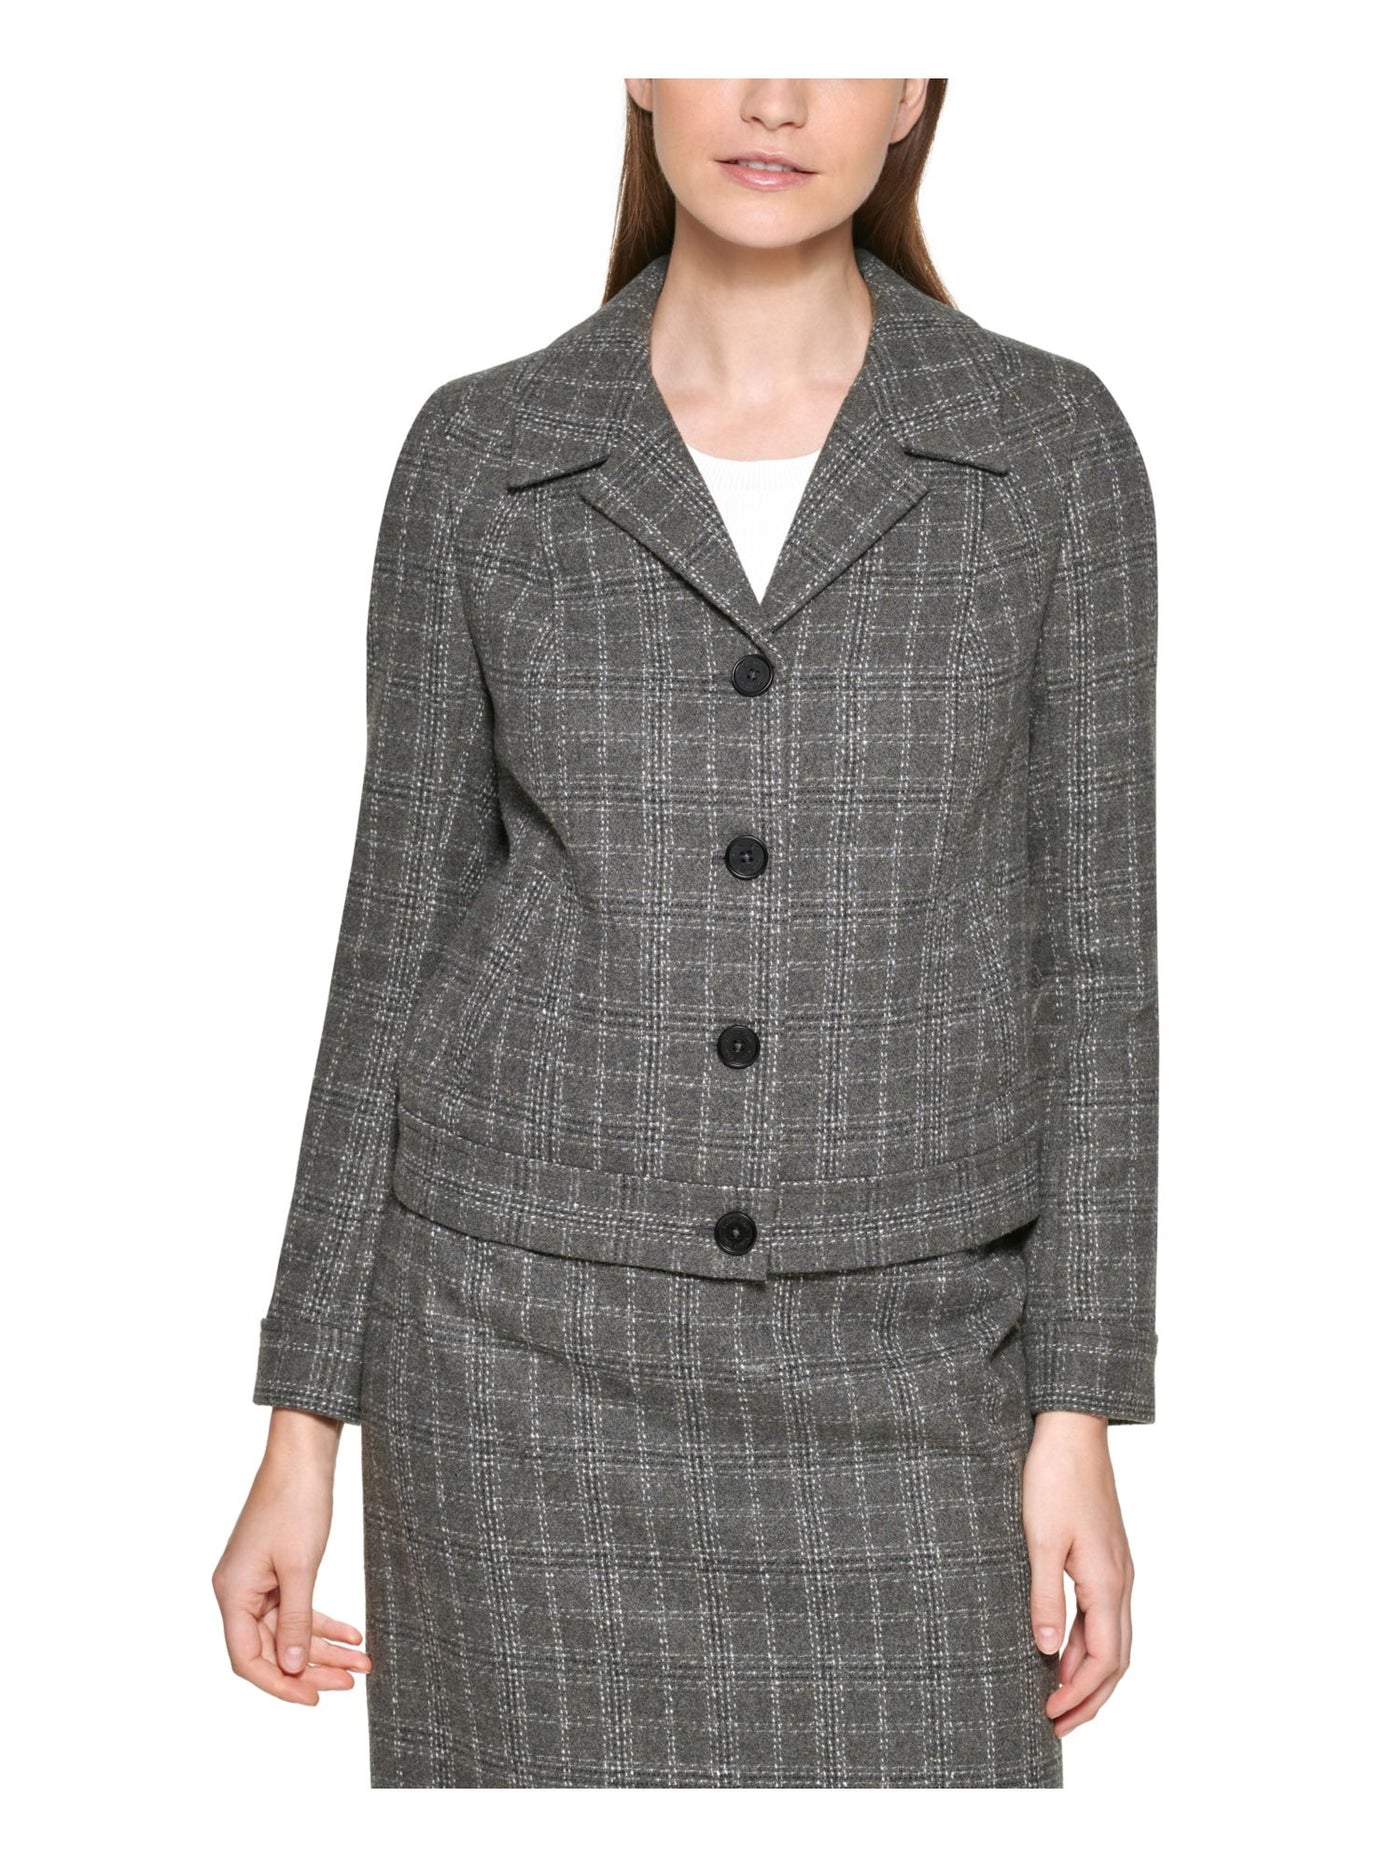 CALVIN KLEIN Womens Gray Pocketed Textured Fitted Plaid Wear To Work Blazer Jacket Petites 12P